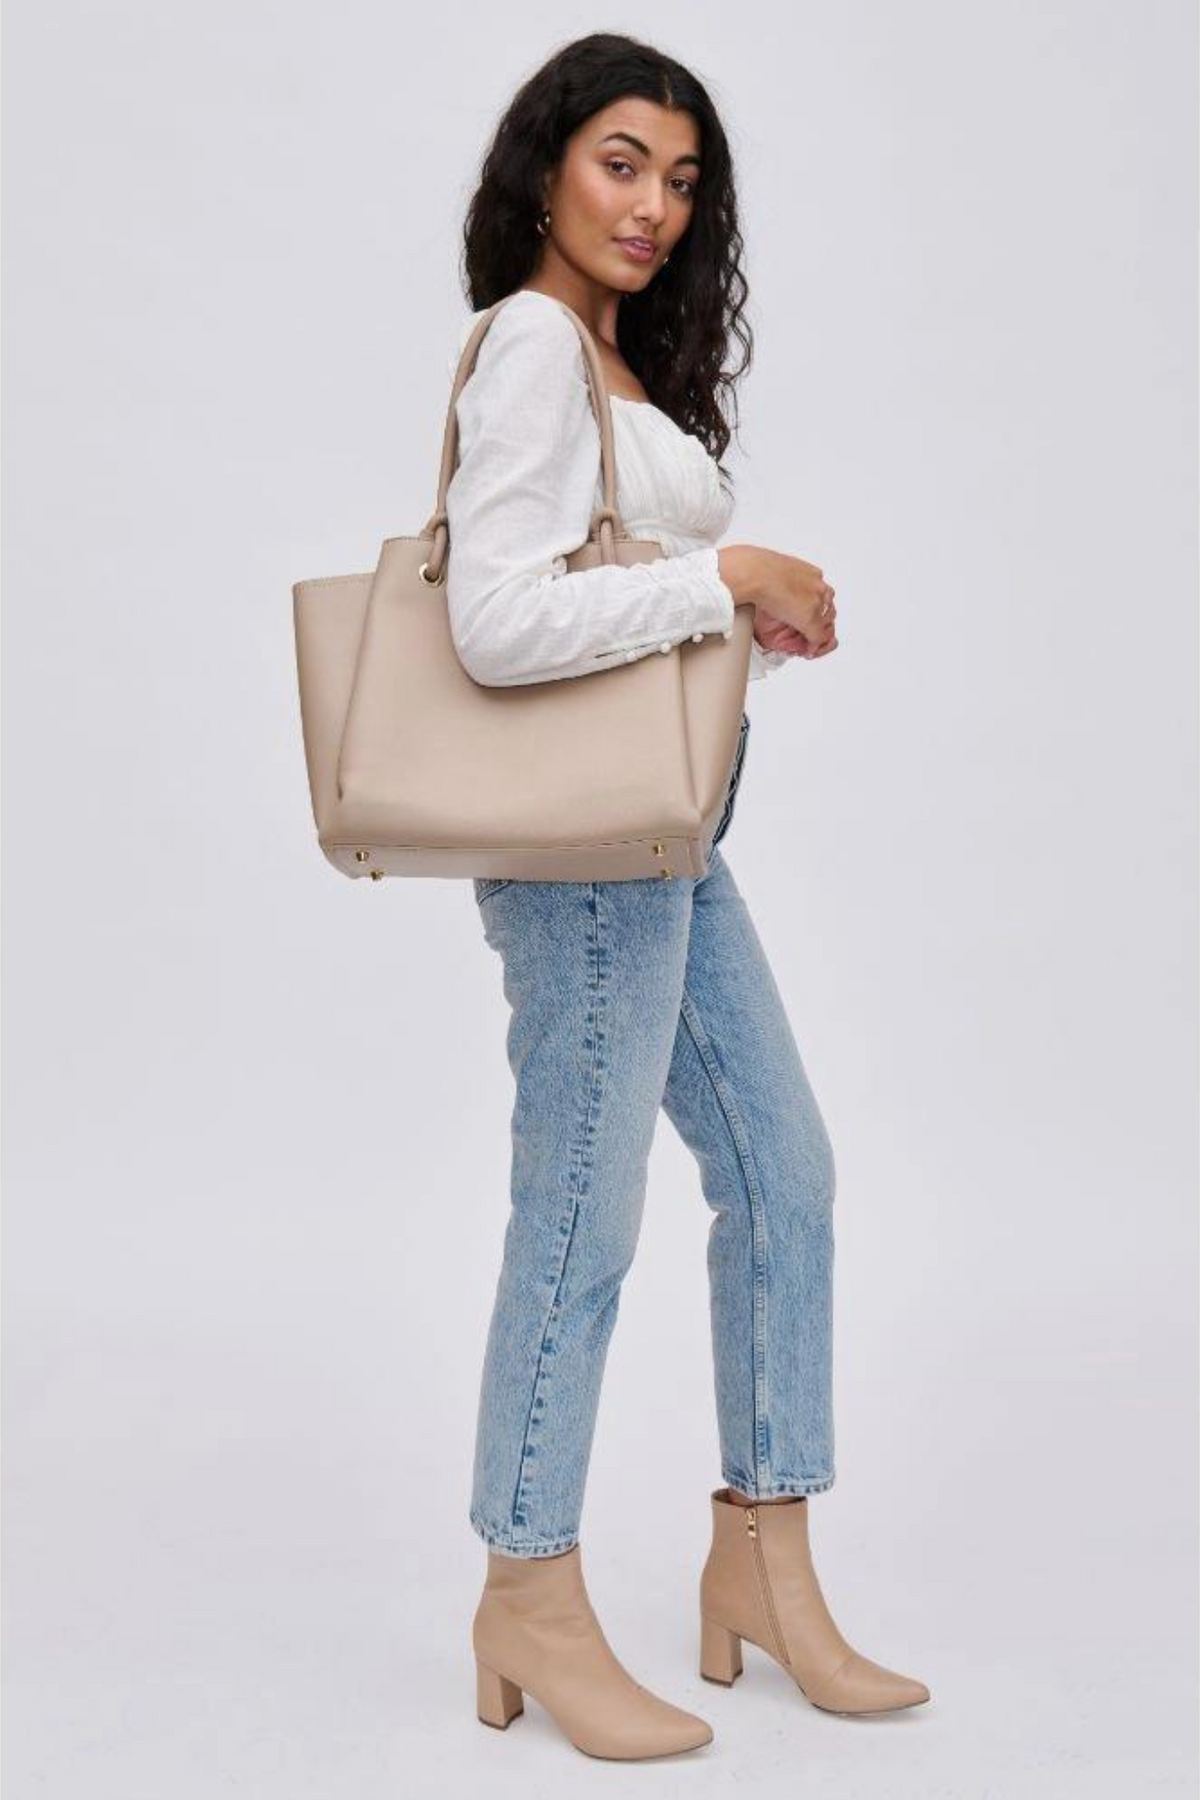 Urban Expressions | Brielle Tote | Sweetest Stitch Online Boutique